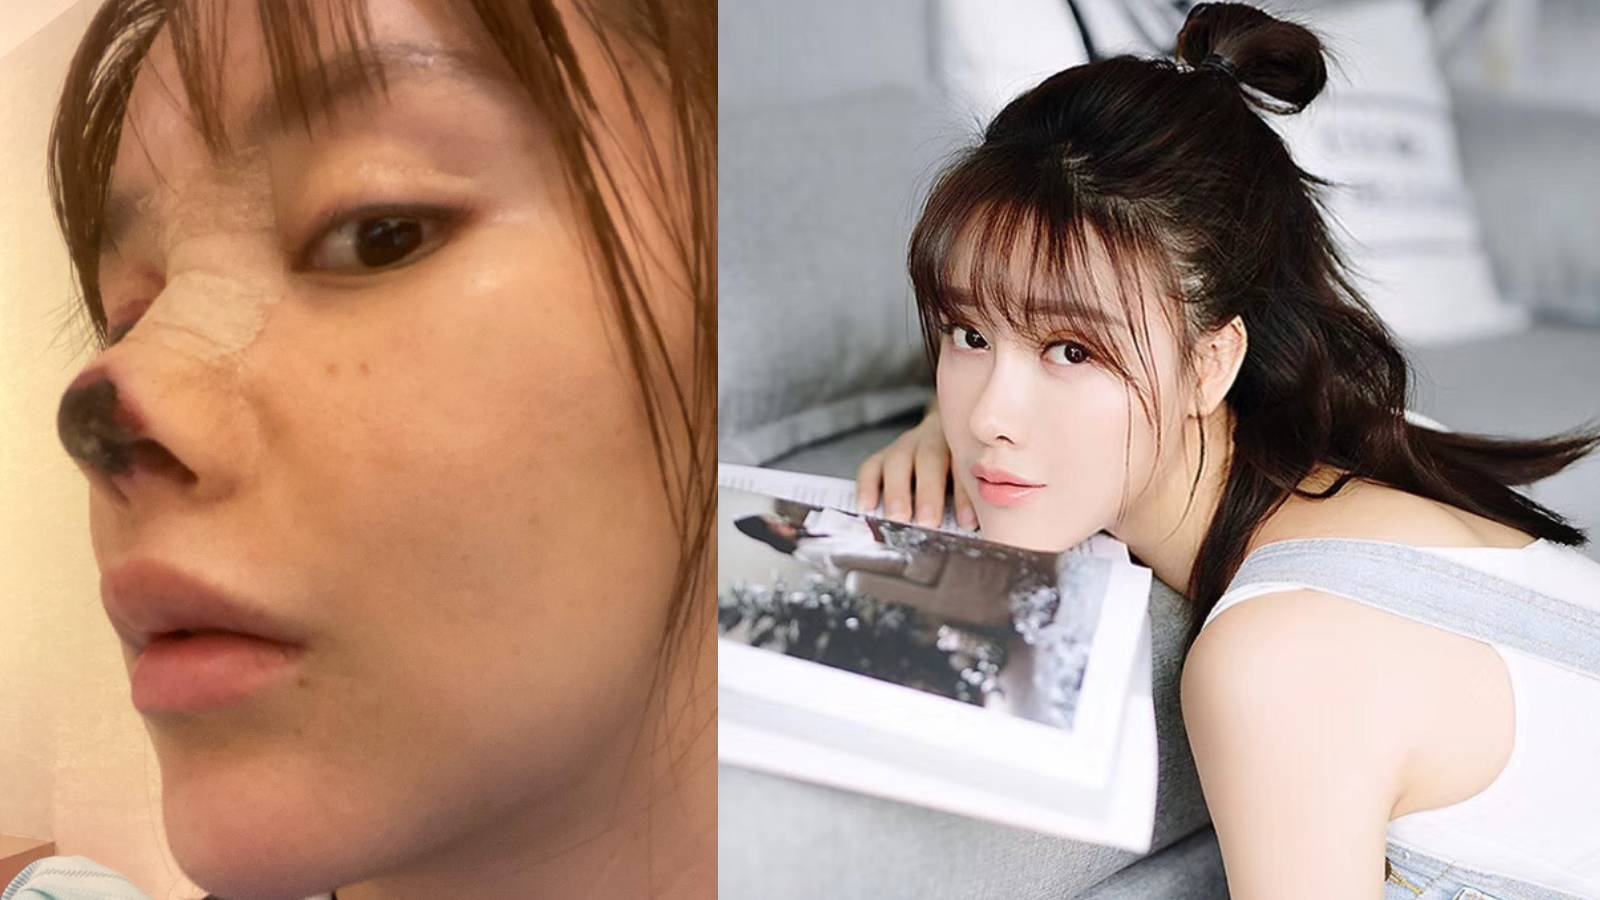 Chinese Actress Gao Liu’s Nose Job Went So Horribly Wrong, The Tip Of Her Nose Turned Black